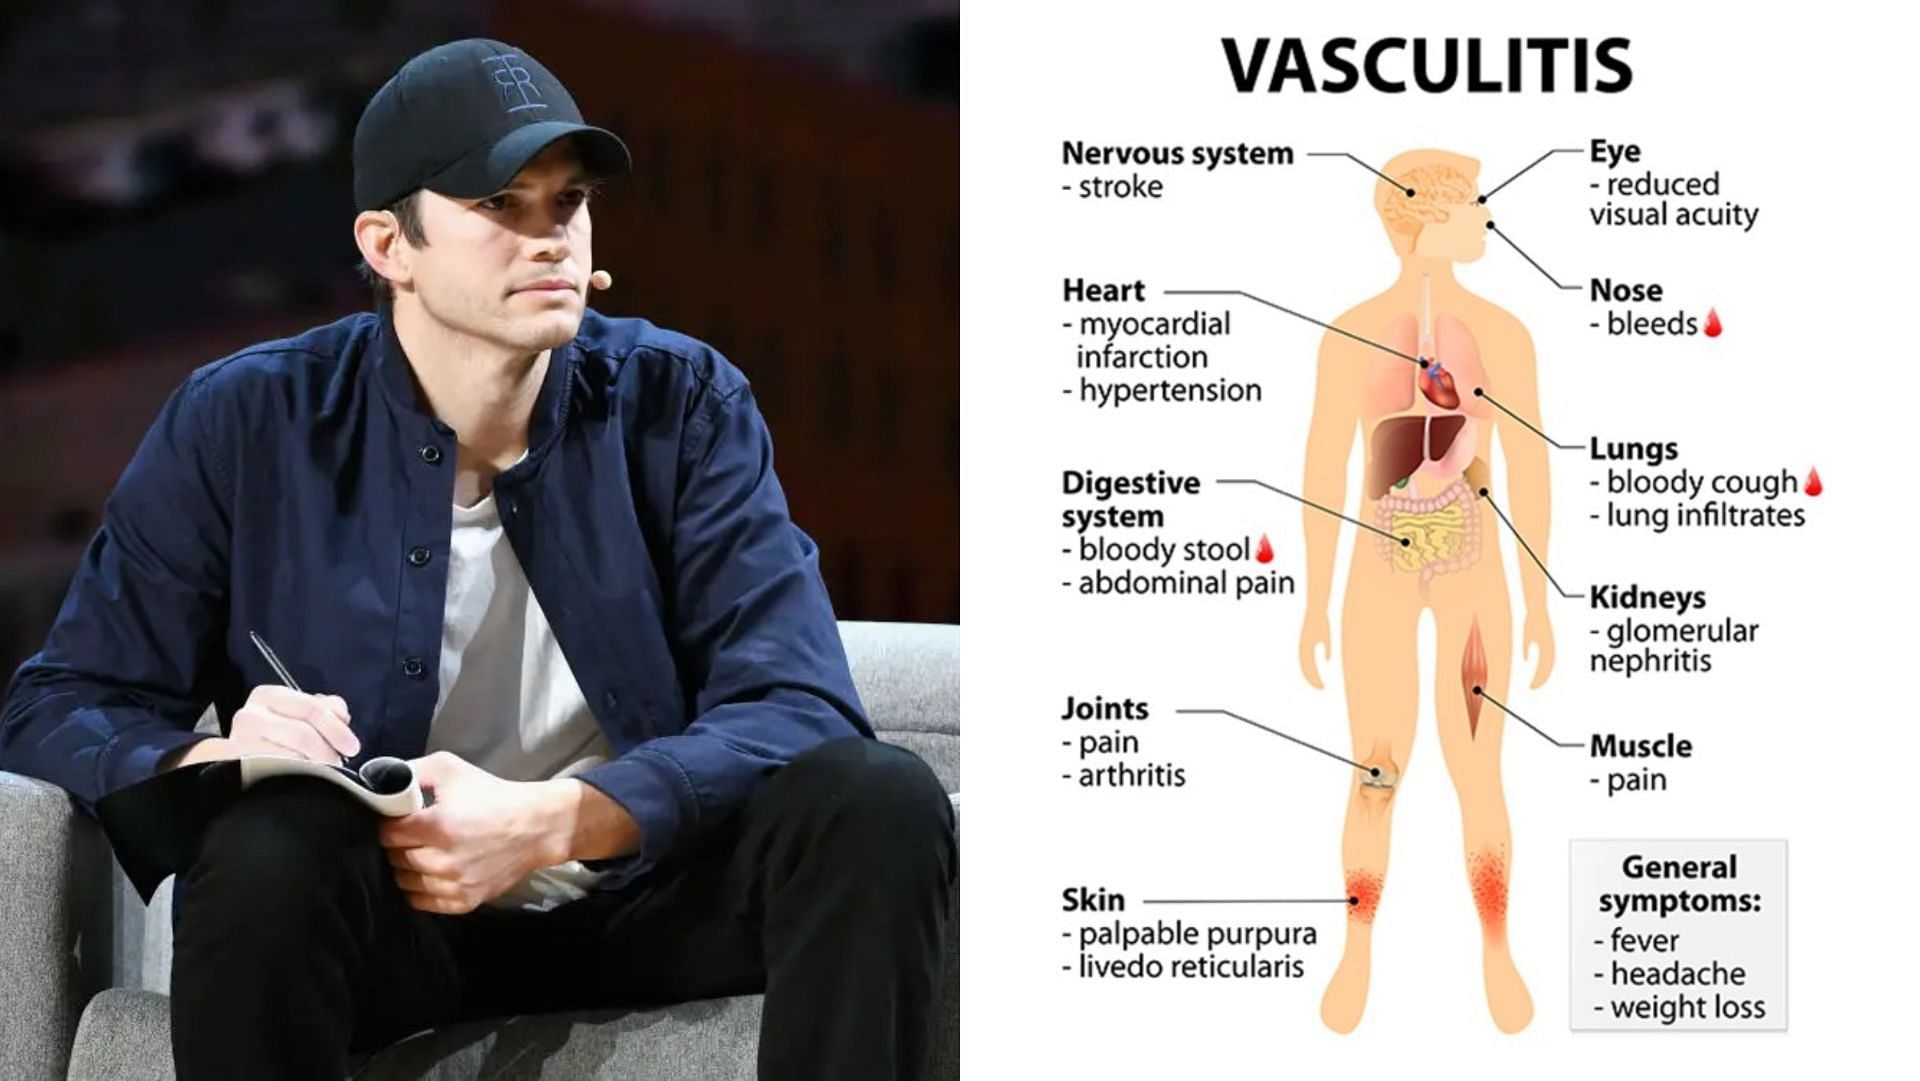 Ashton Kutcher has revealed that he suffered from vasculitis a couple of years ago (Image via Michael Kovac/Getty Images, and ttsz/iStock/Getty Images)